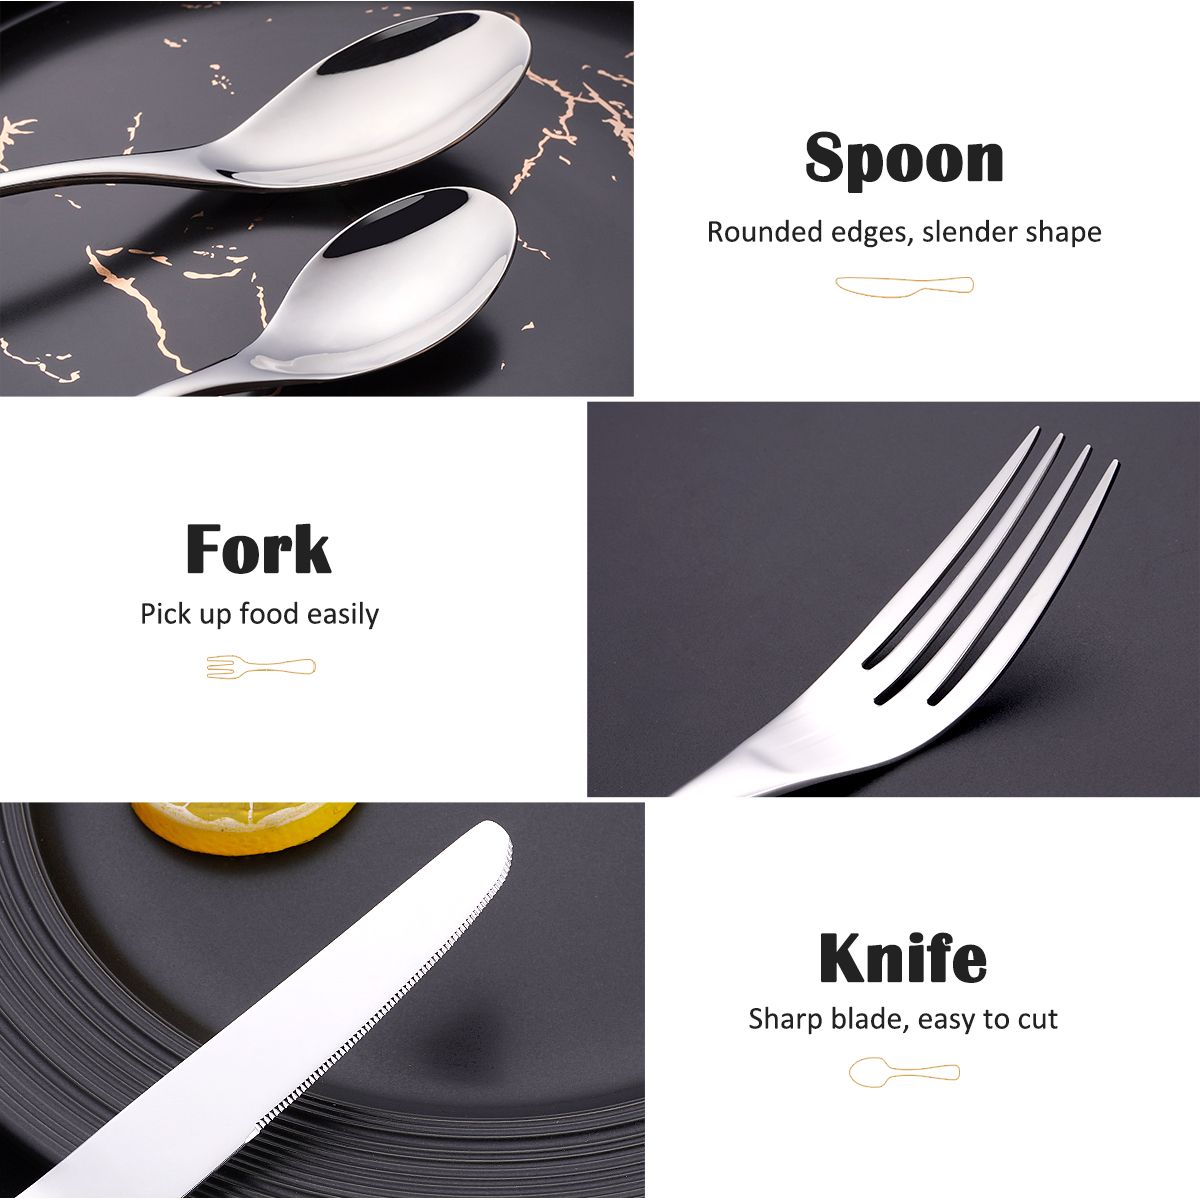 Silverplate Flatware Manufacturers Us Cutlery Wallace Wholesale Sets International China Gold Plated Silverware